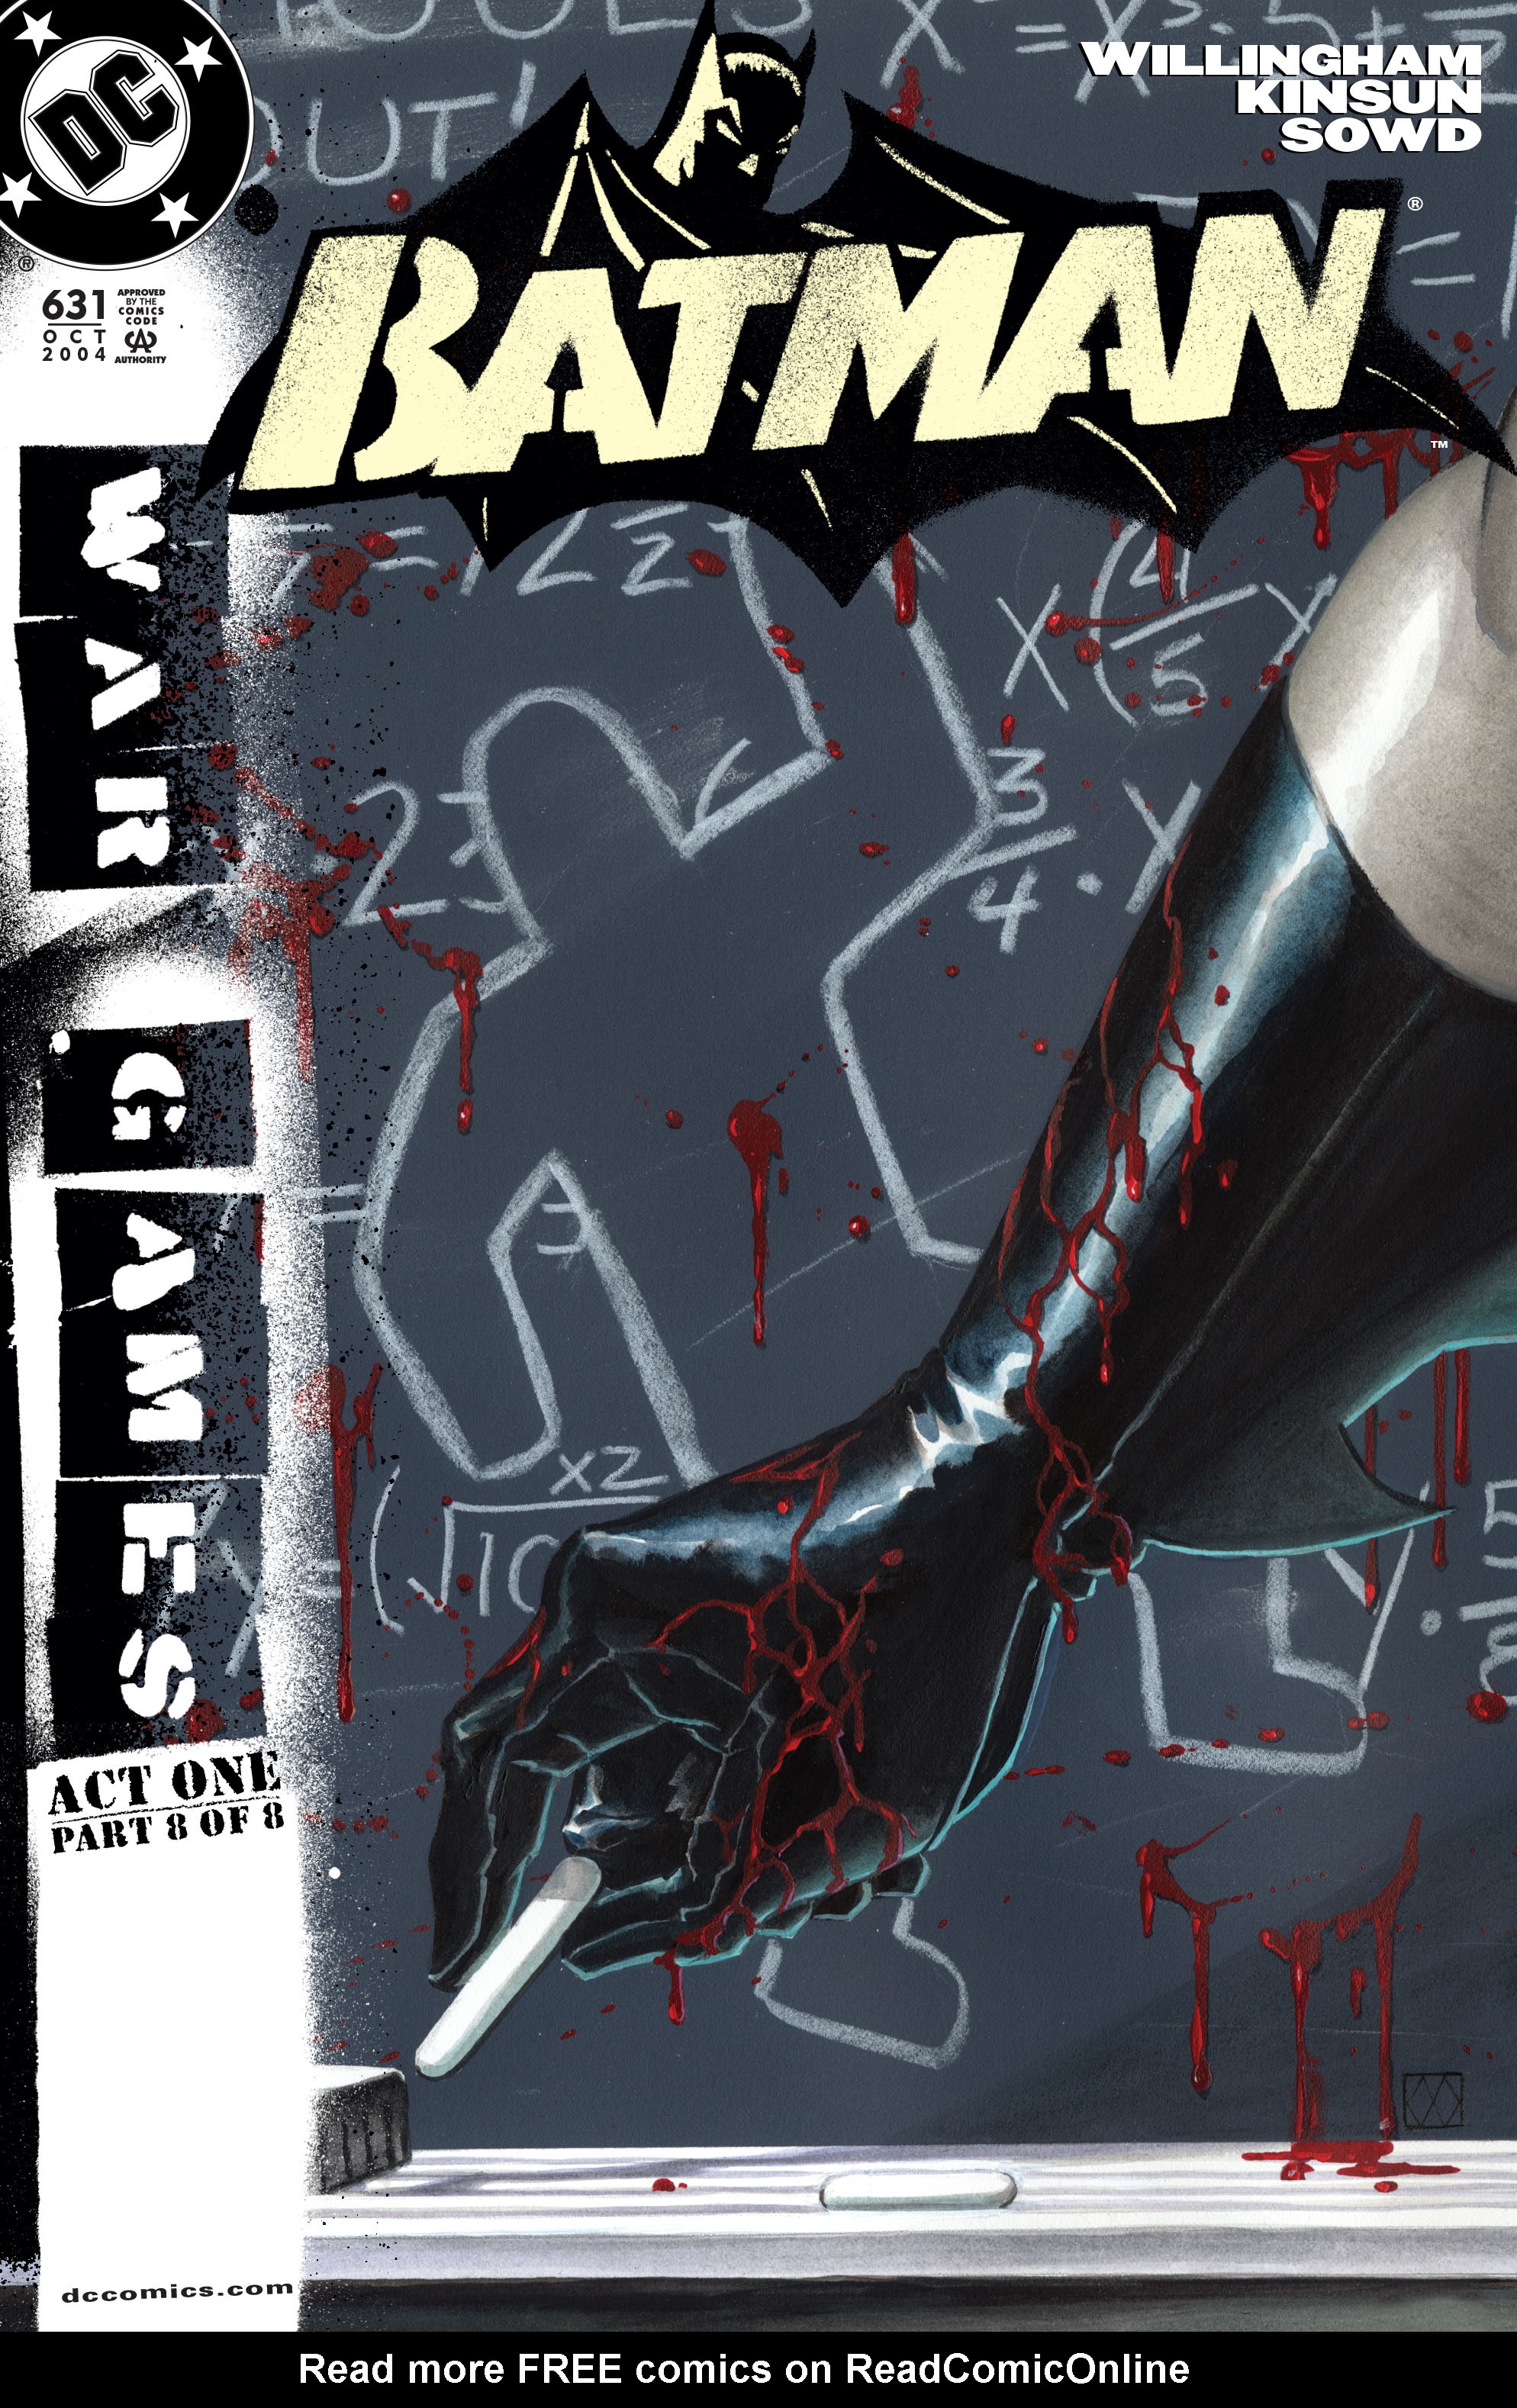 Batman War Games Act 1 Outbreak Issue 8 | Read Batman War Games Act 1  Outbreak Issue 8 comic online in high quality. Read Full Comic online for  free - Read comics